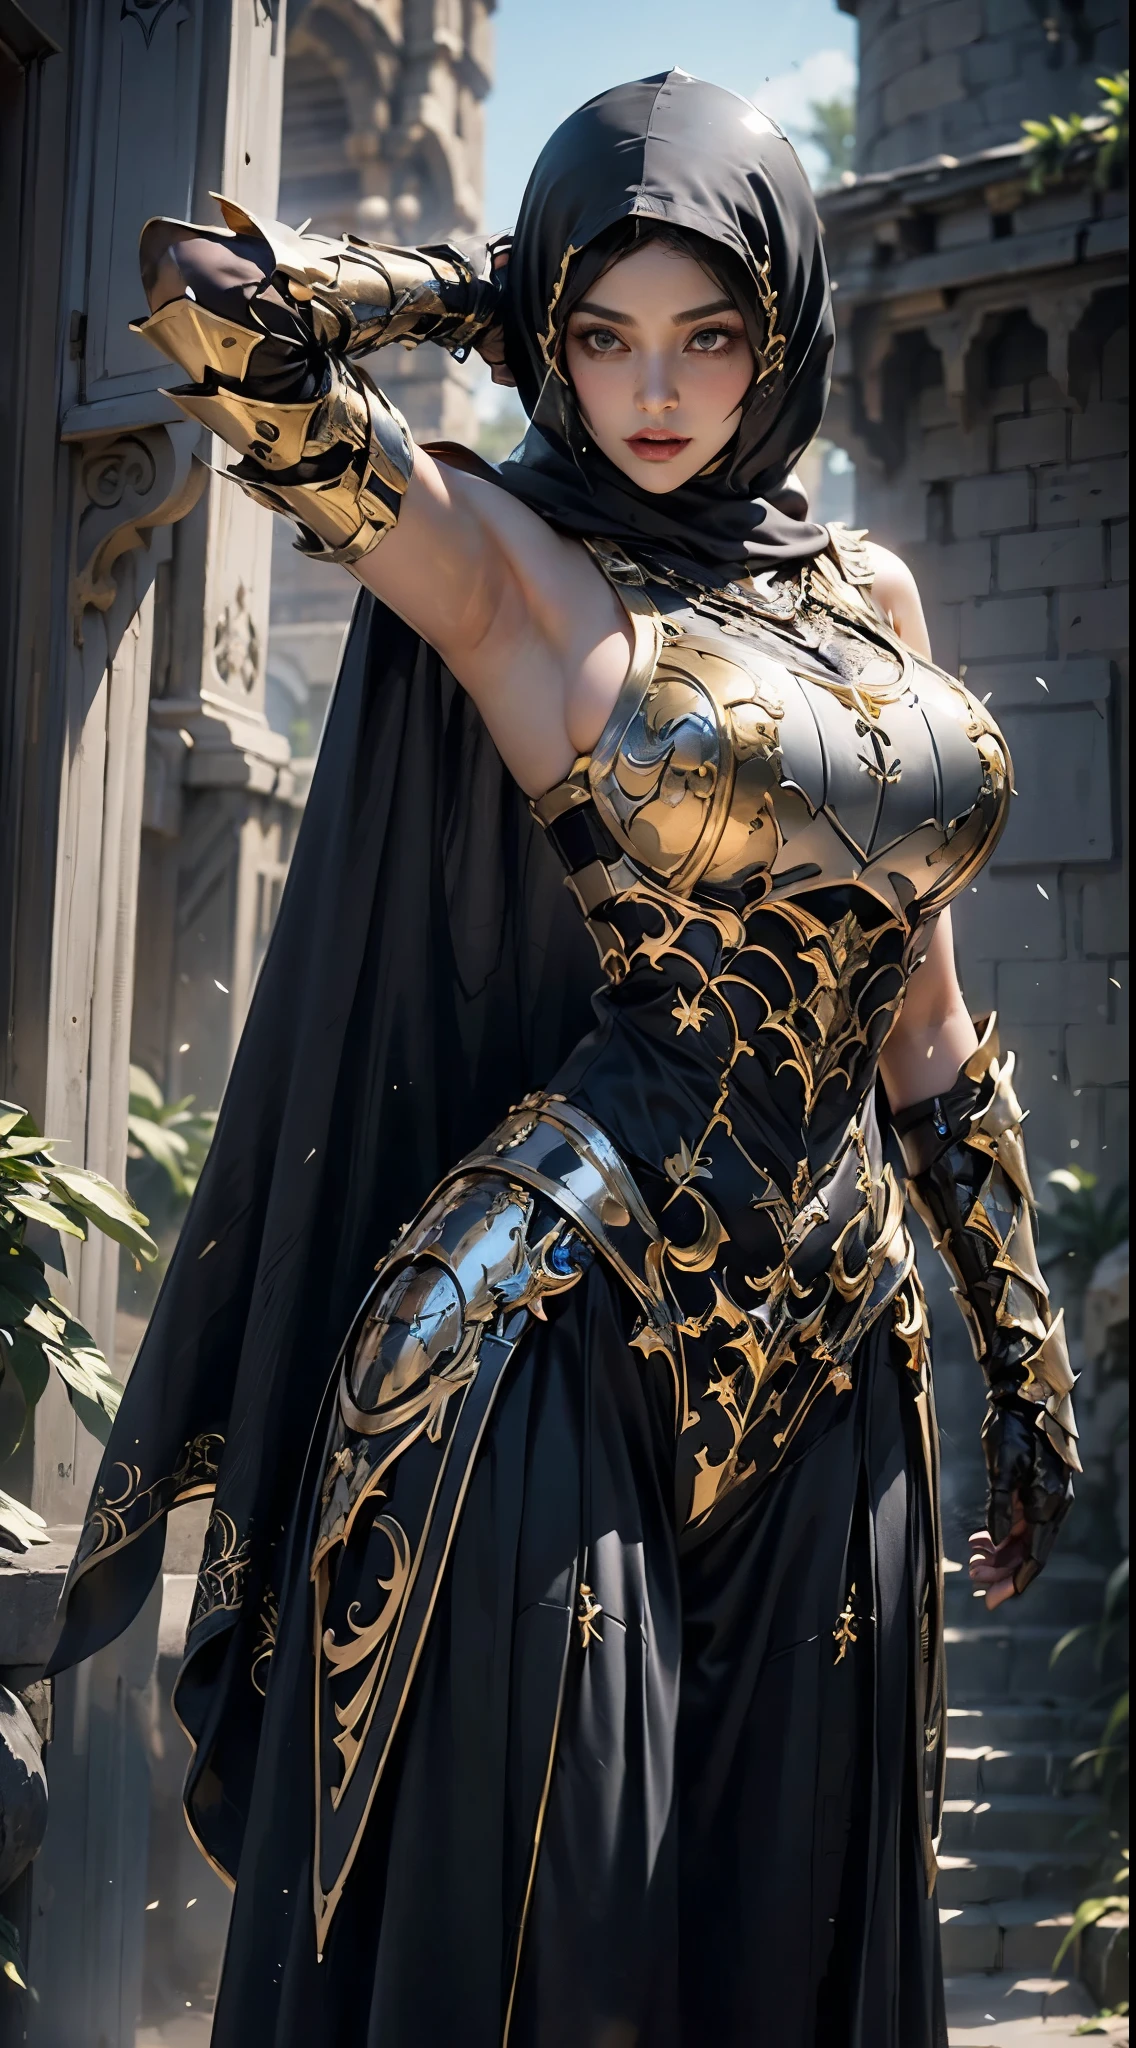 photorealistic, high resolution, 1 girl, hips up,  long straight black hair, beautiful eyes, normal breast, dark souls style, armor, black hijab, black niqab, golden embroidery, ultra detailed armpit, sweaty armpit, wet, muscular, desert castle, backlighting, 